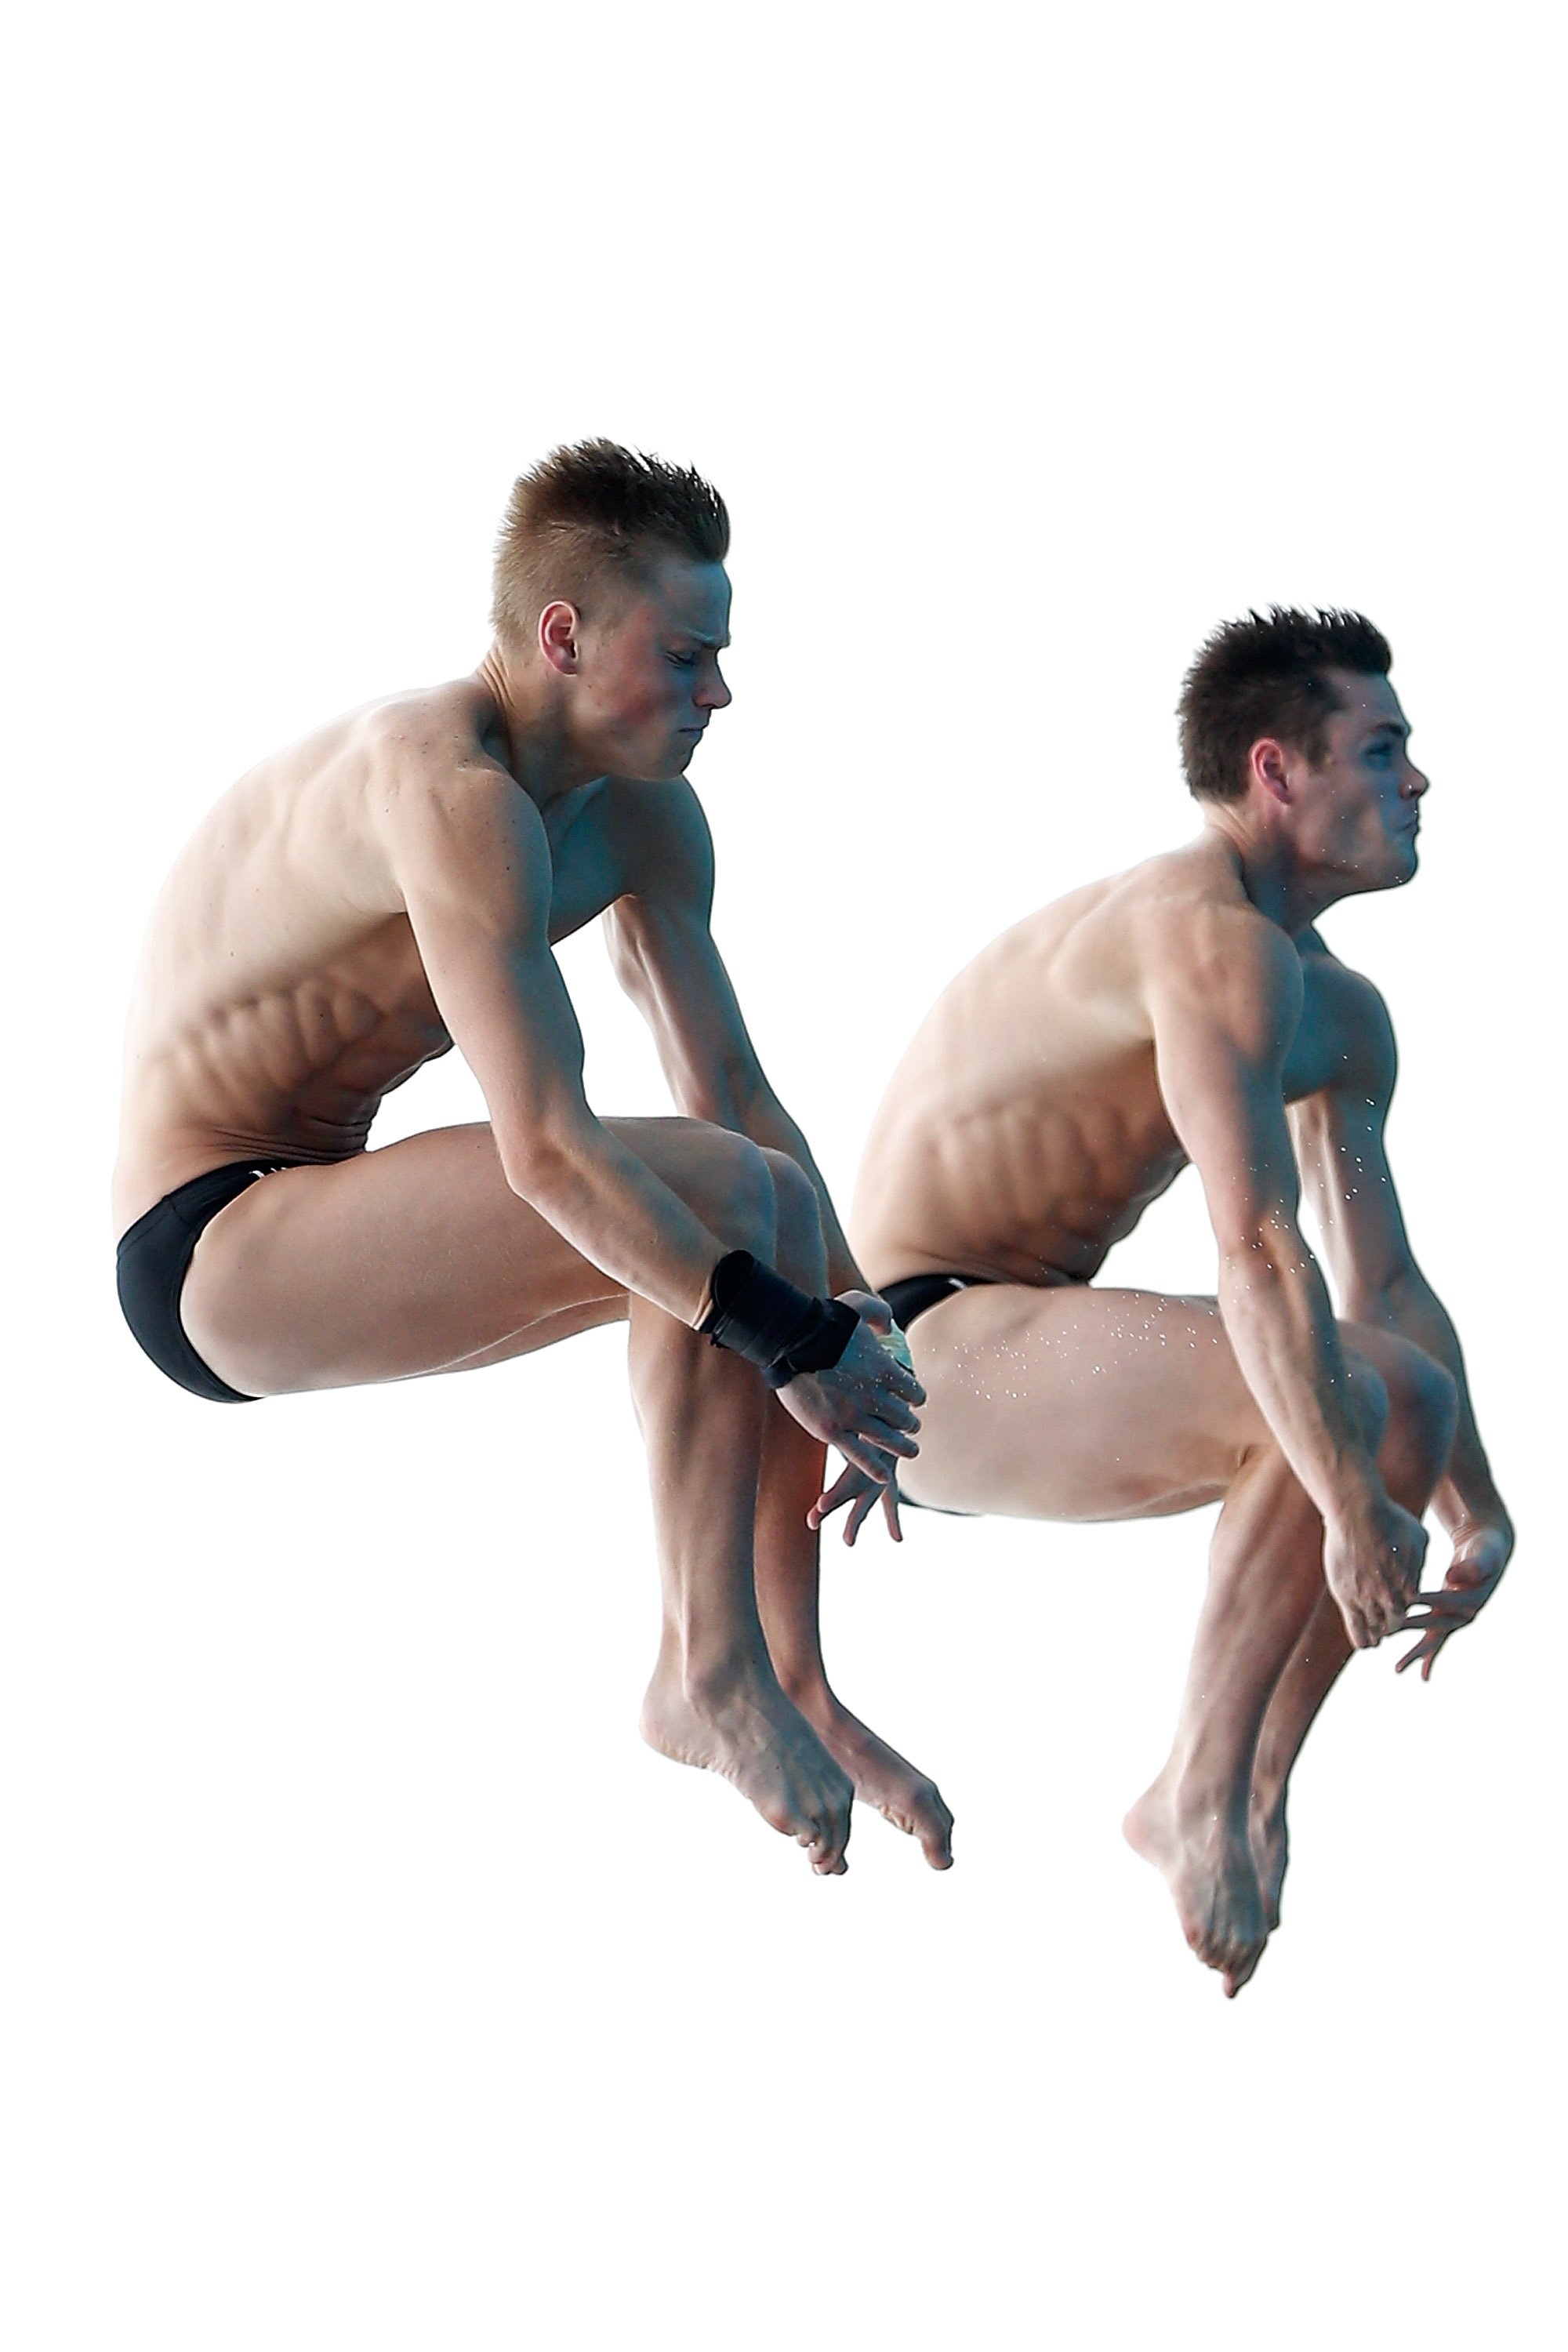 David Boudia and Steele Johnson of United States compete in the men's 10M Synchro Springboard Preliminary on day Two of the 19th FINA Diving World Cup at the Oriental Sports Center in Shanhai on July 16, 2014.